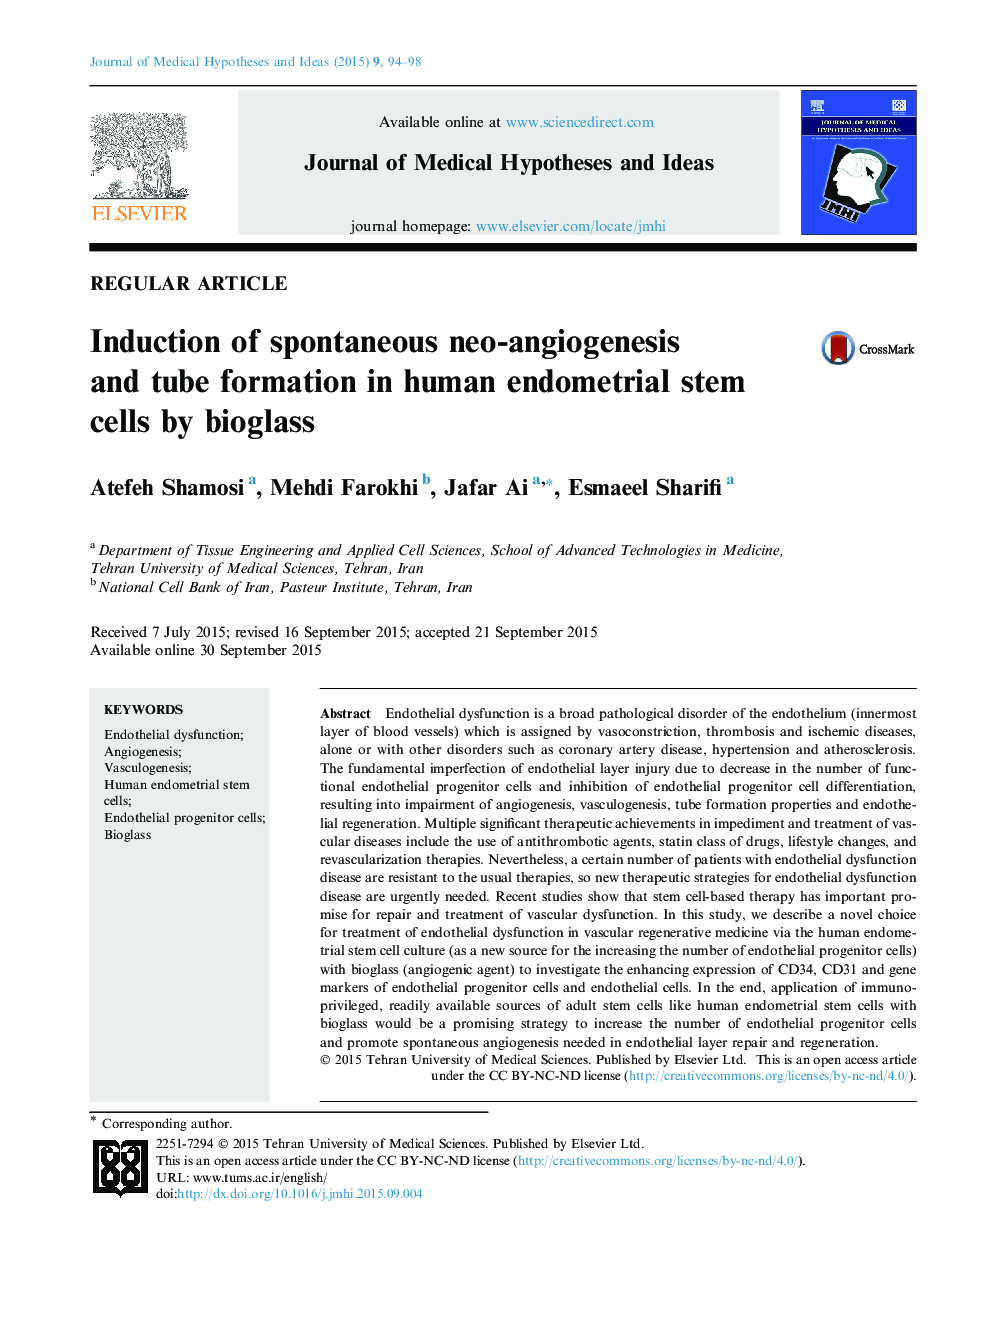 Induction of spontaneous neo-angiogenesis and tube formation in human endometrial stem cells by bioglass